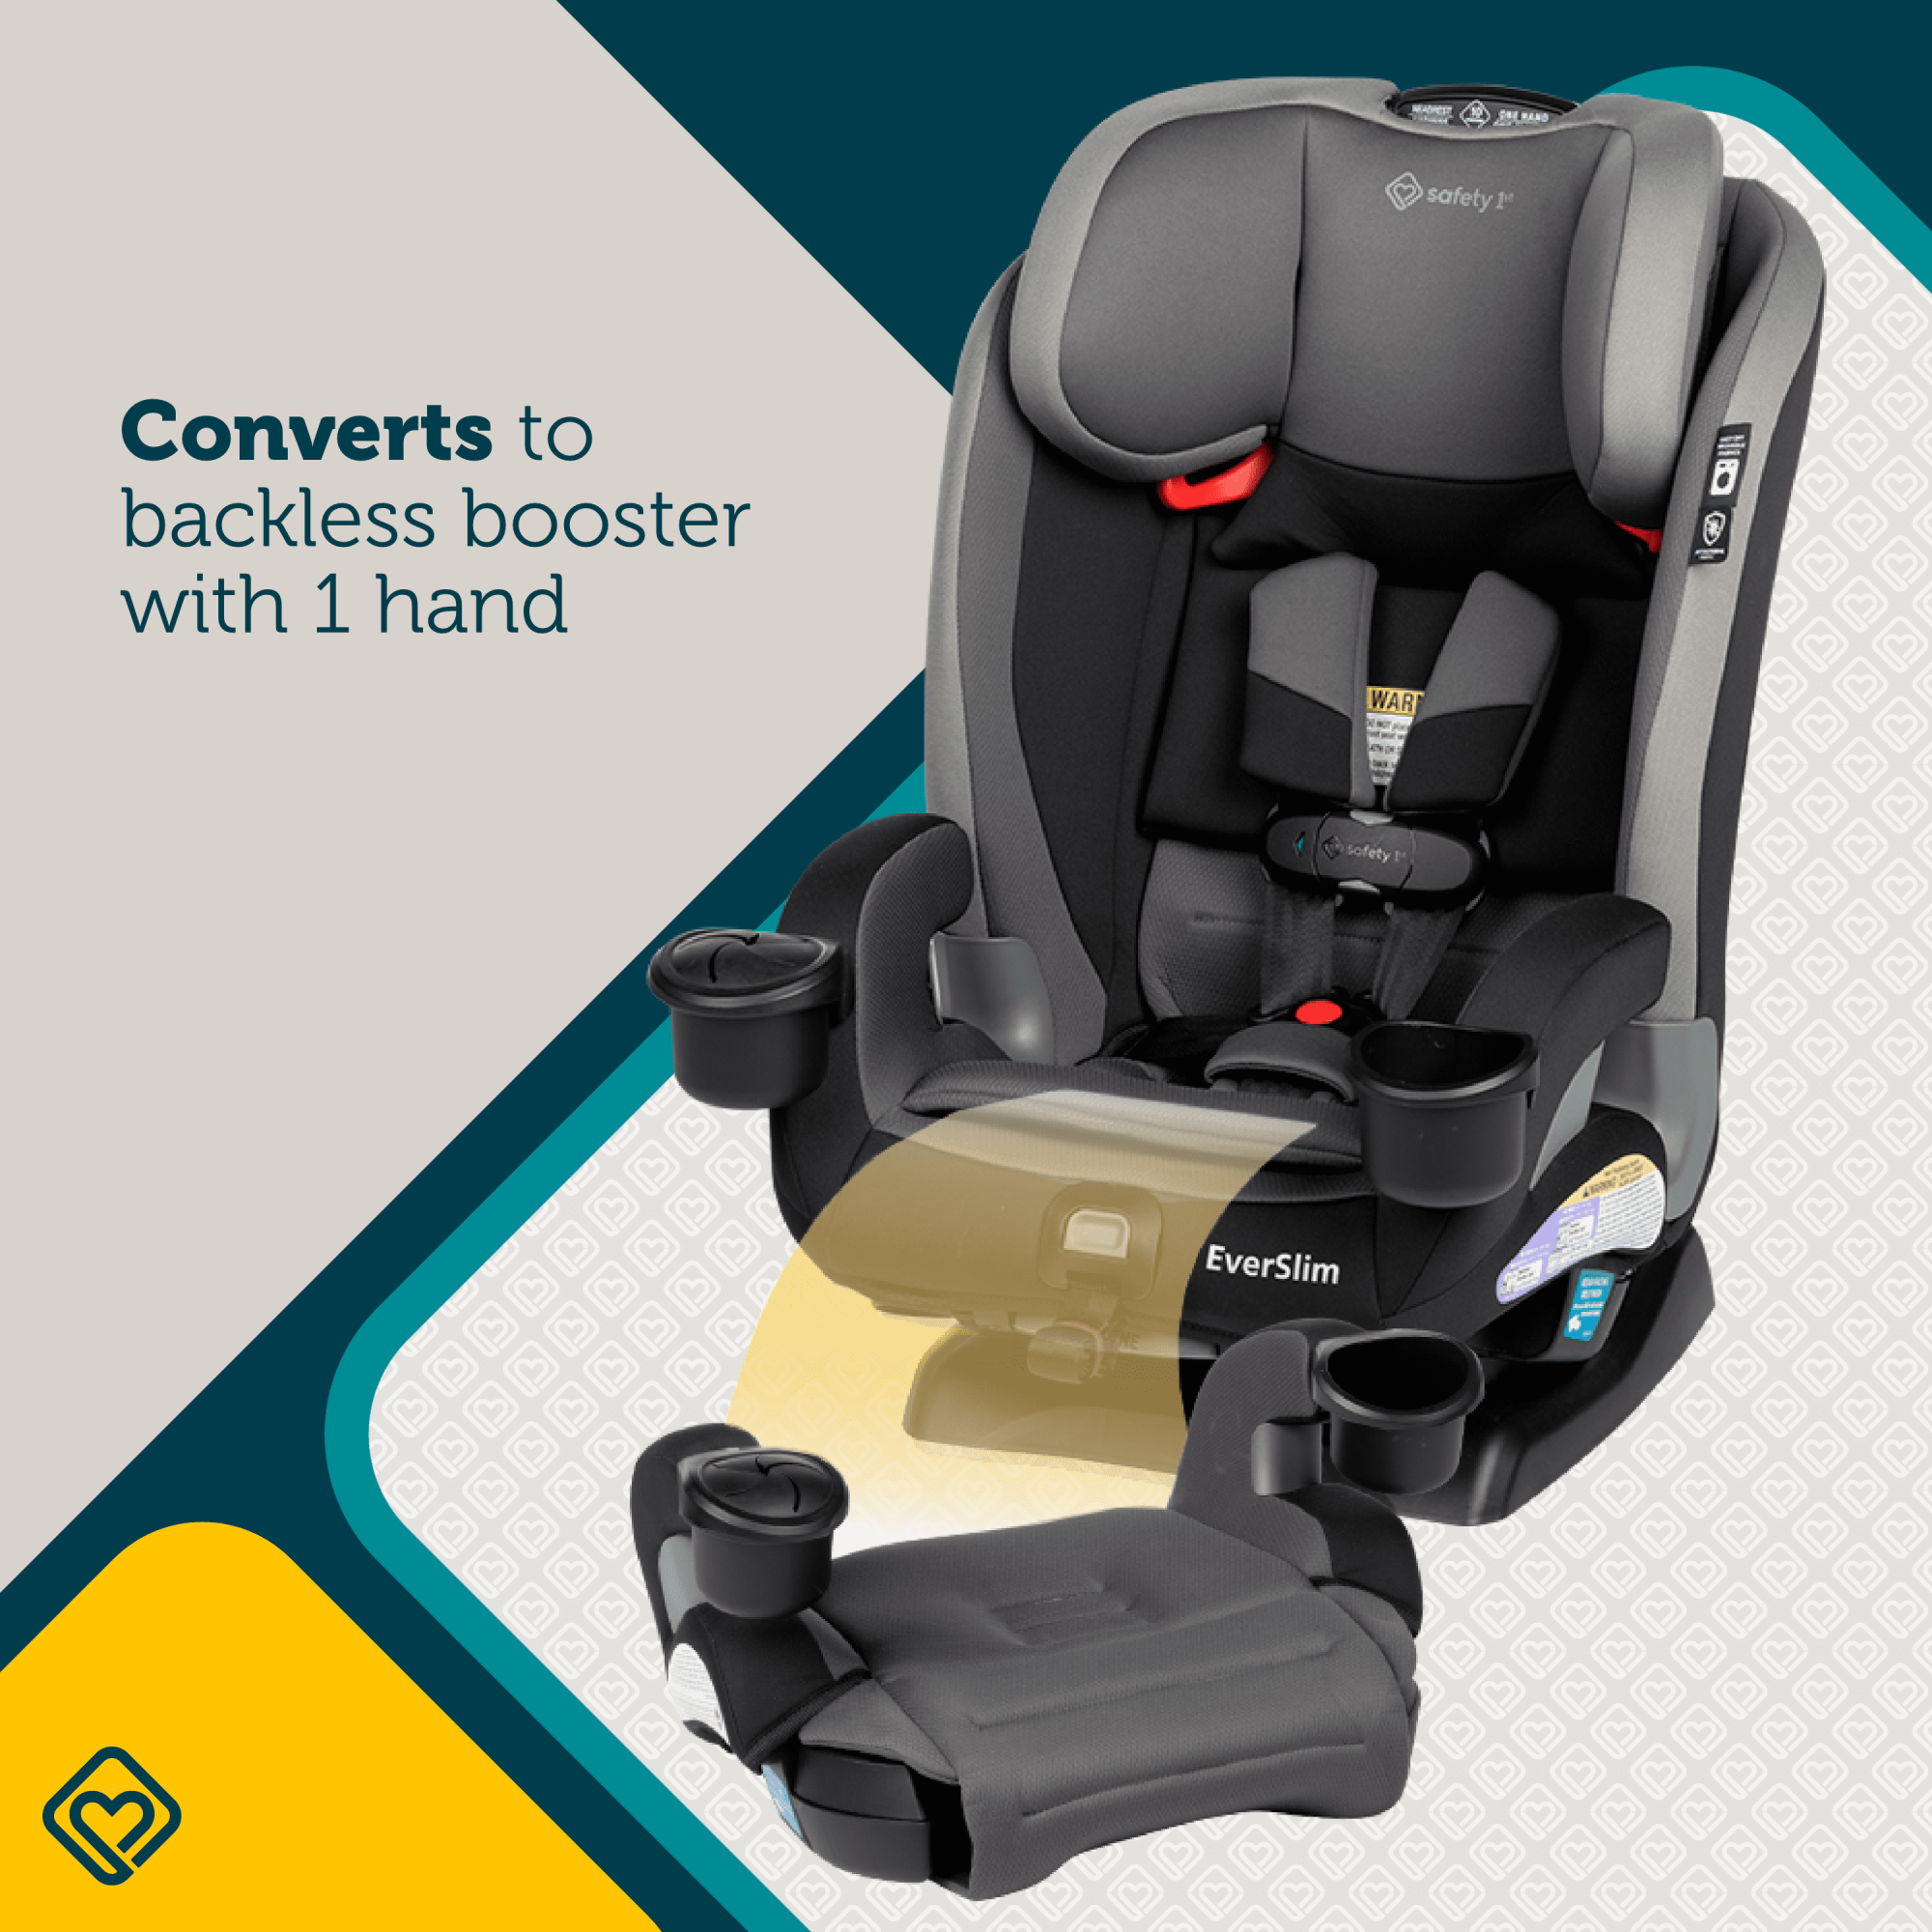 EverSlim 4-Mode All-in-One Convertible Car Seat - ultra-slim design - just 17.3" across without the cup holders - fits 3 across most back seats